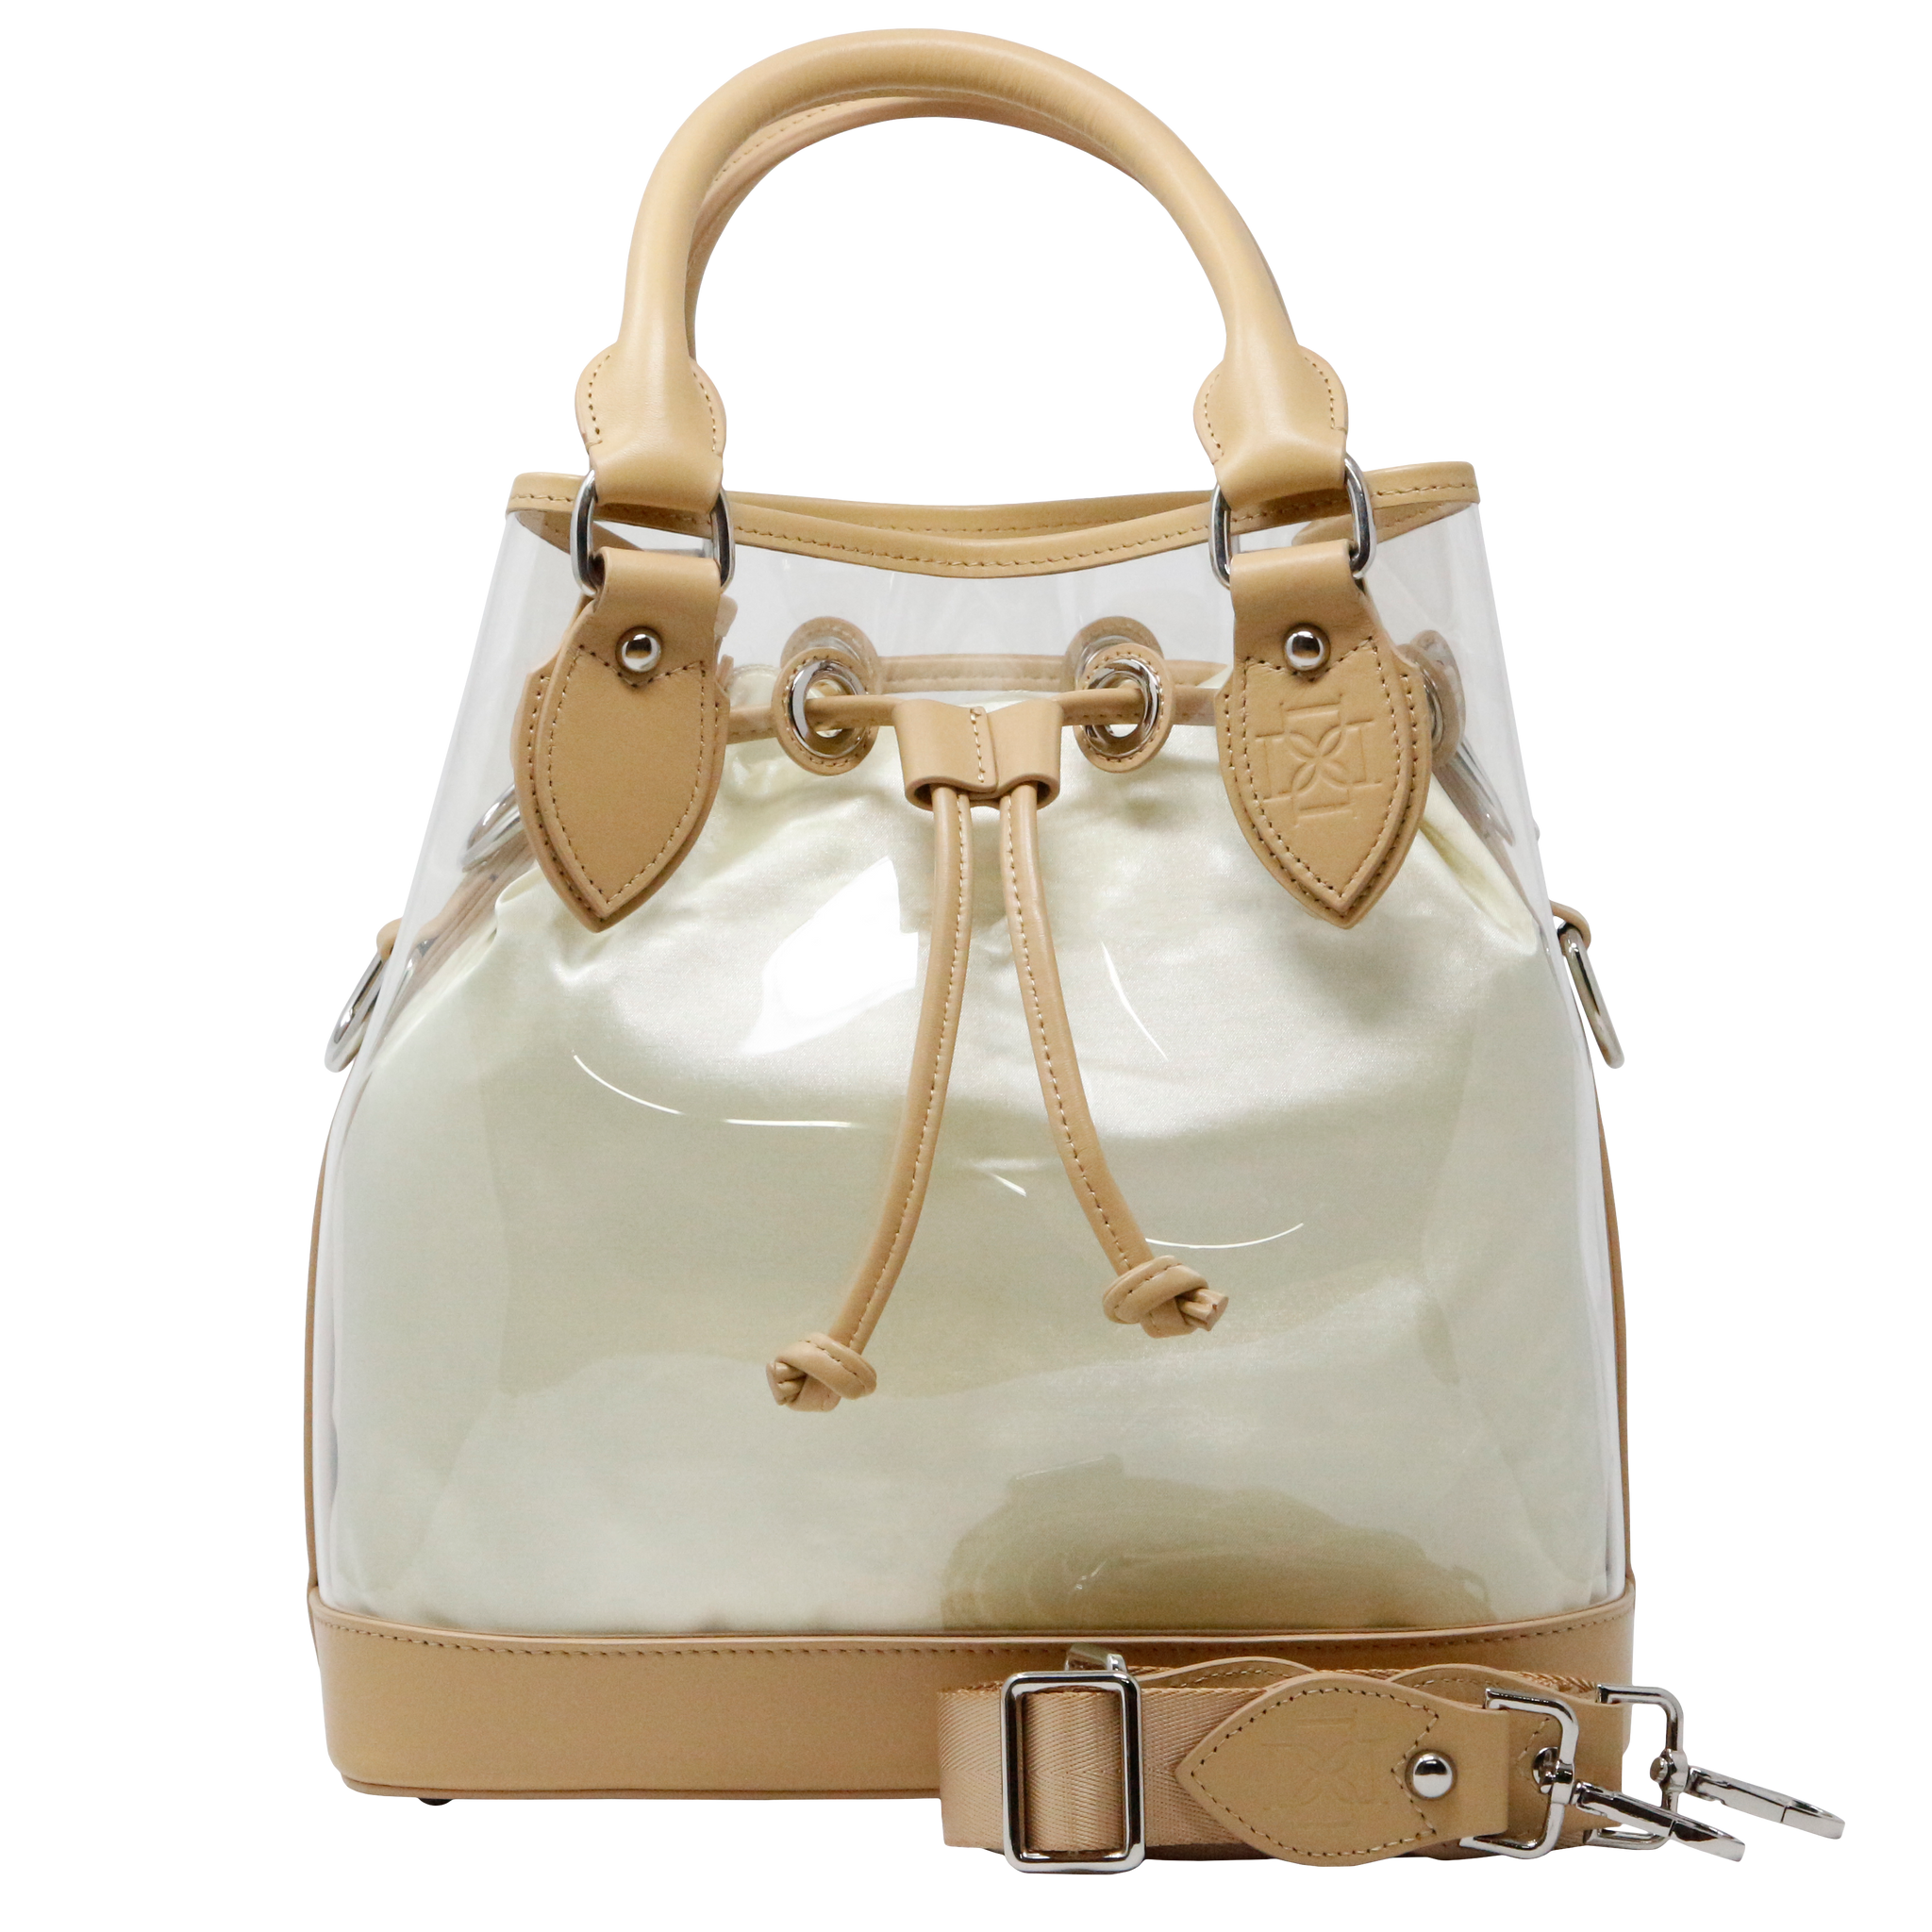 D Tote - Tan Leather Clear Base